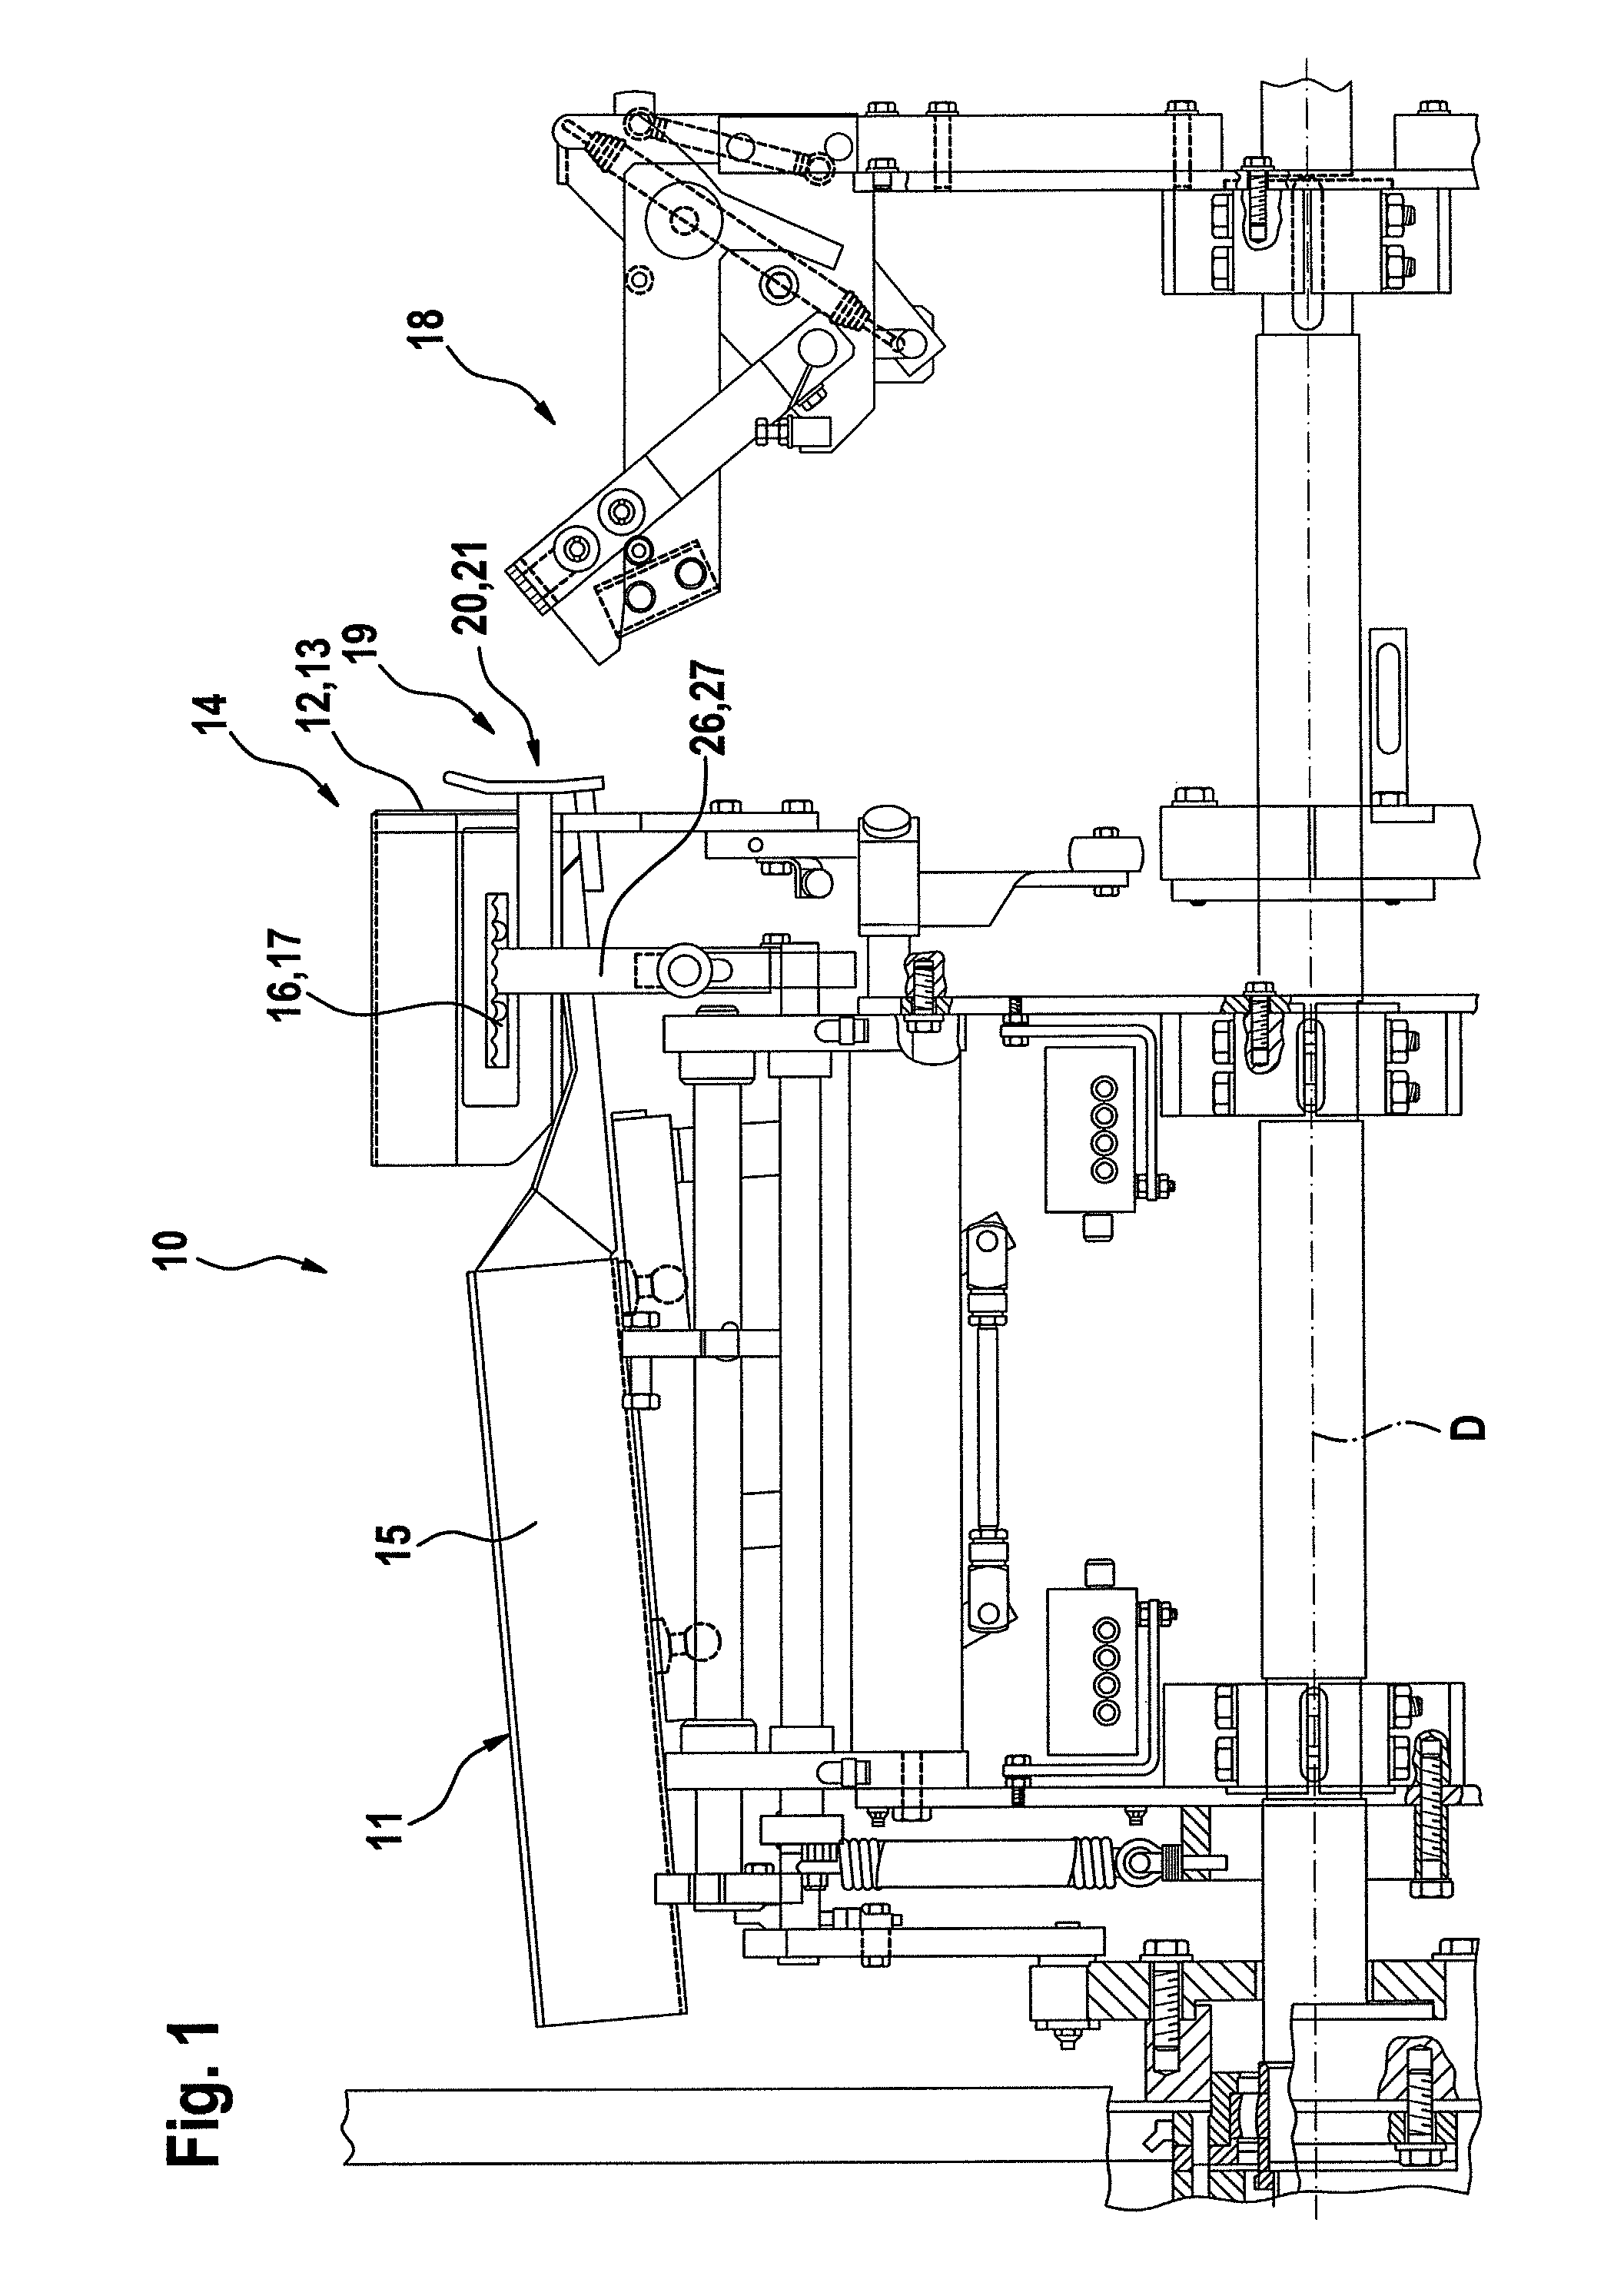 Device for receiving and fixing fish within a device for processing fish